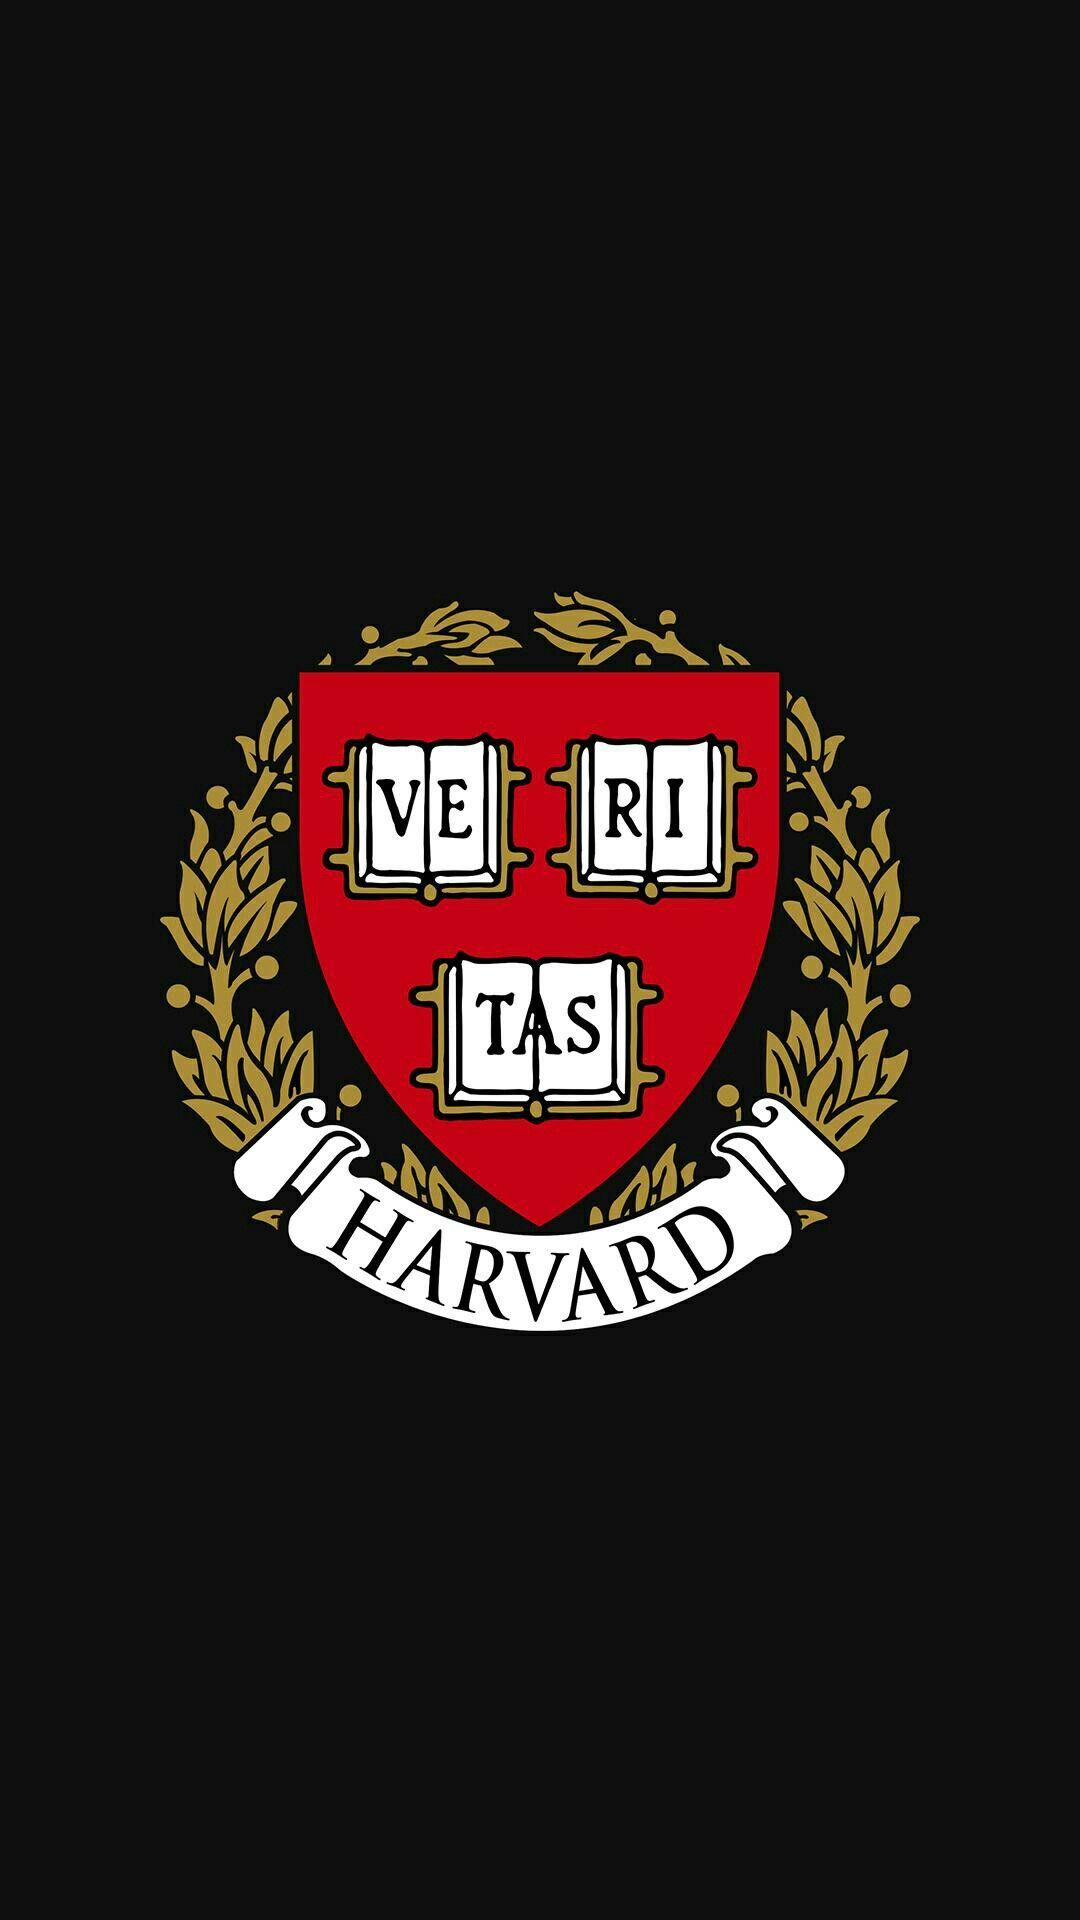 DaveB isn't connected with Harvard Red Conservative Reps